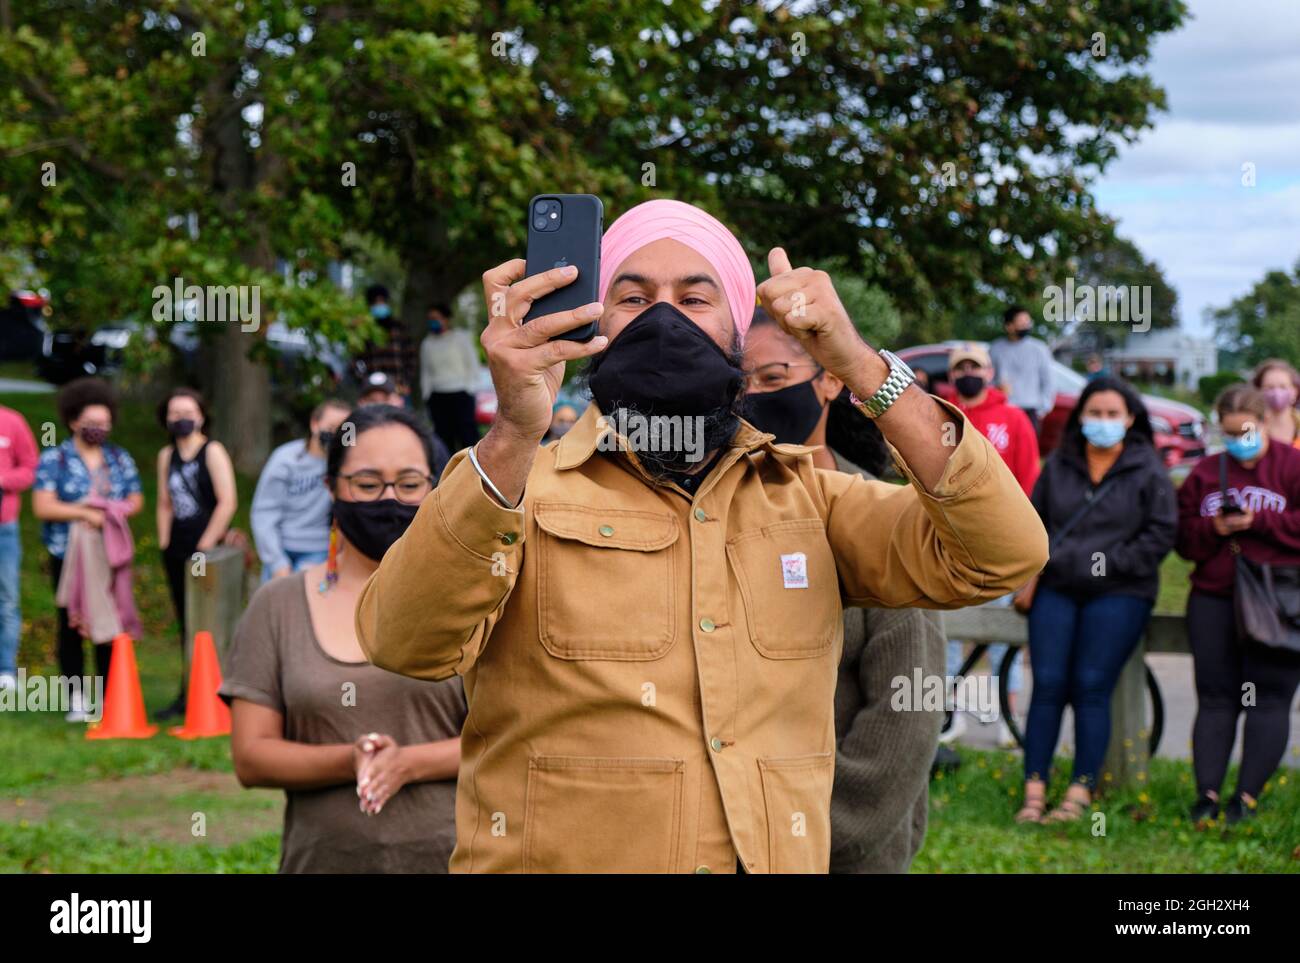 Halifax, Nova Scotia, Canada. September 4th 2021. NDP Leader Jagmeet Singh meets with local young voters to discuss their concerns in view for the upcoming federal election on September 20th. Mr.Singh had fun with the crowd making selfies and videos. Credit: meanderingemu/Alamy Live News Stock Photo